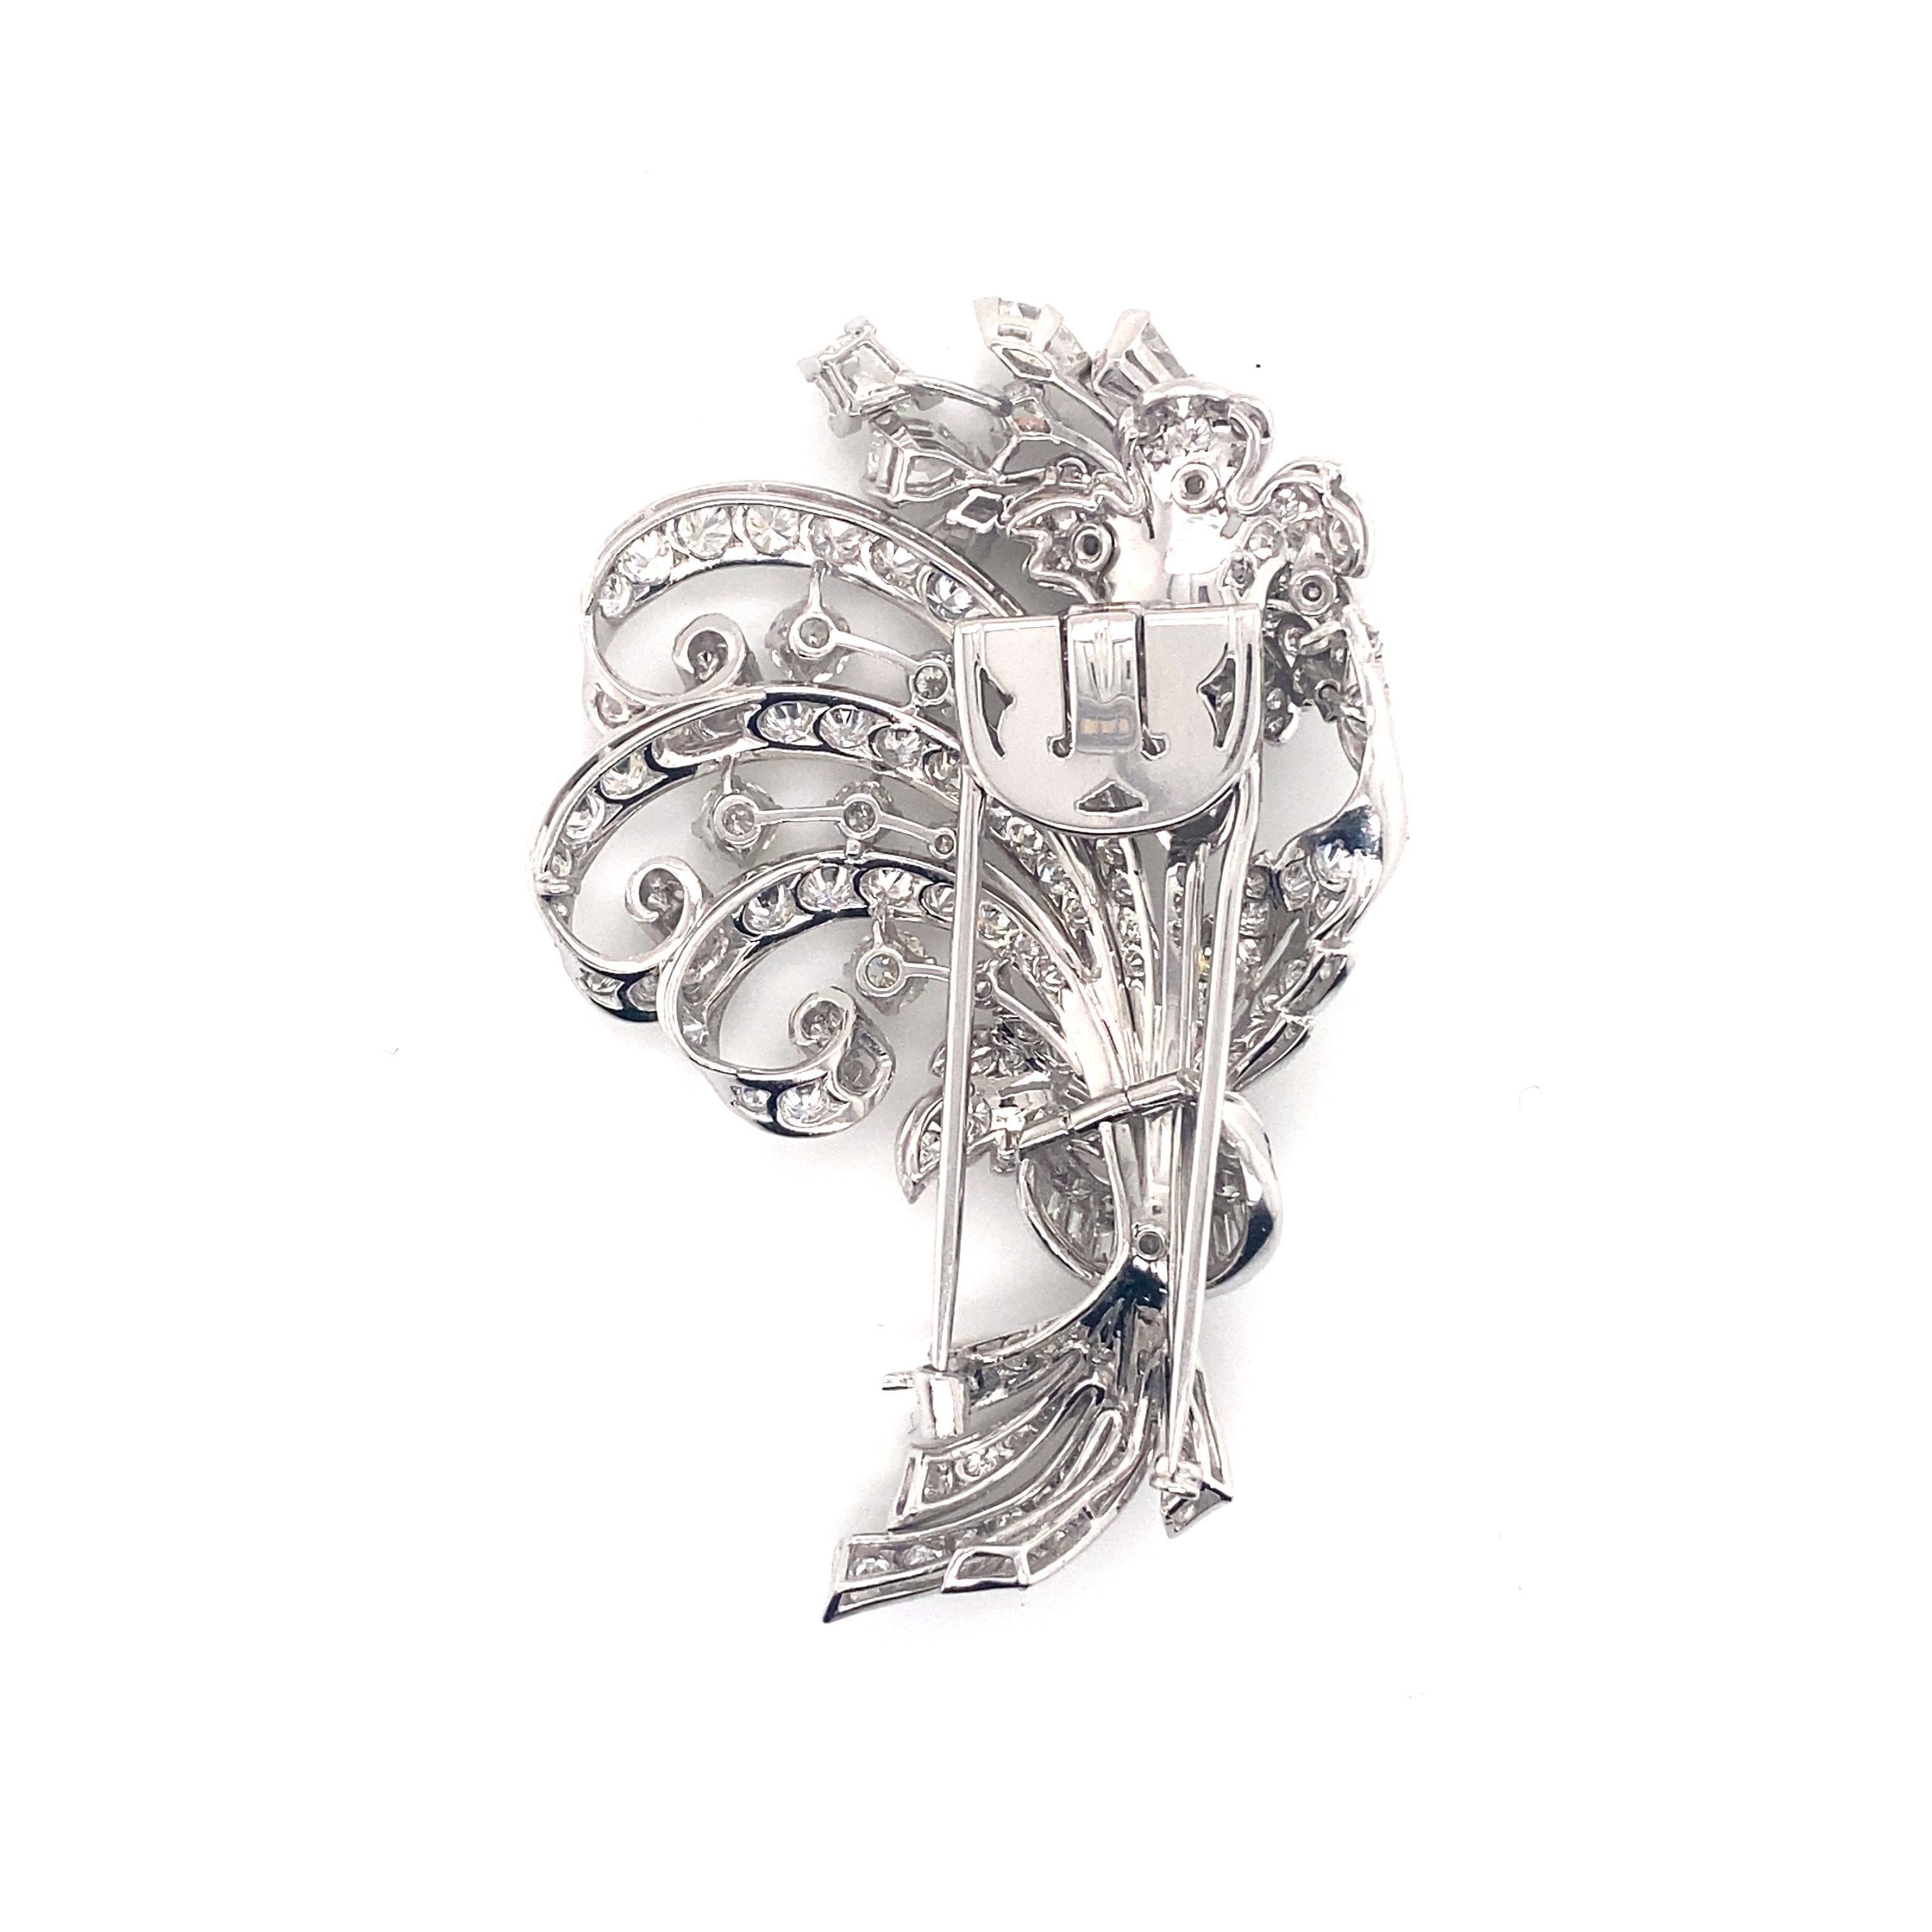 Vintage 1950’s Platinum Diamond Flower Bouquet Pin 9.70ct - The pin contains 5 fancy kite shape diamonds and 1 marquise diamond with a total approximate weight of 1.50ct, 10 baguette diamonds approximately .70ct, and 12 round brilliant diamonds set